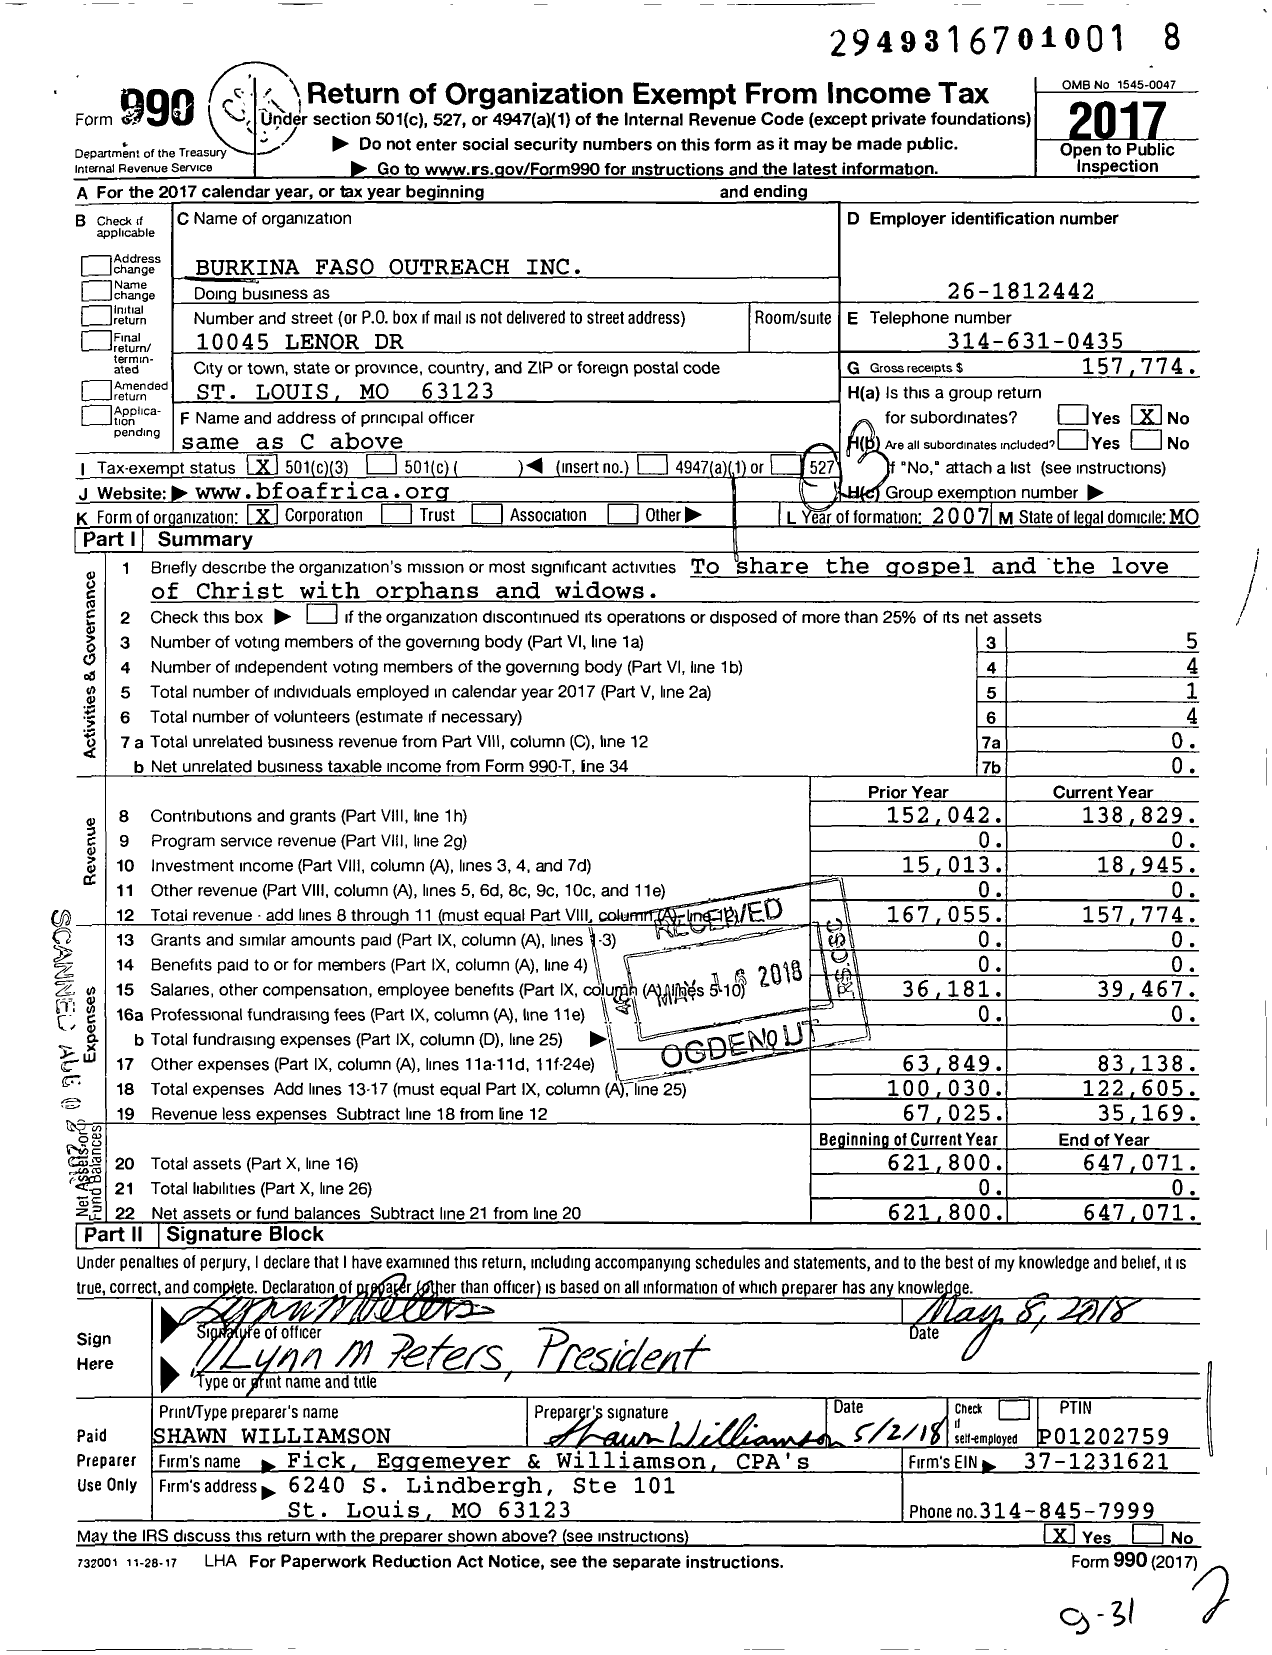 Image of first page of 2017 Form 990 for Burkina Faso Outreach